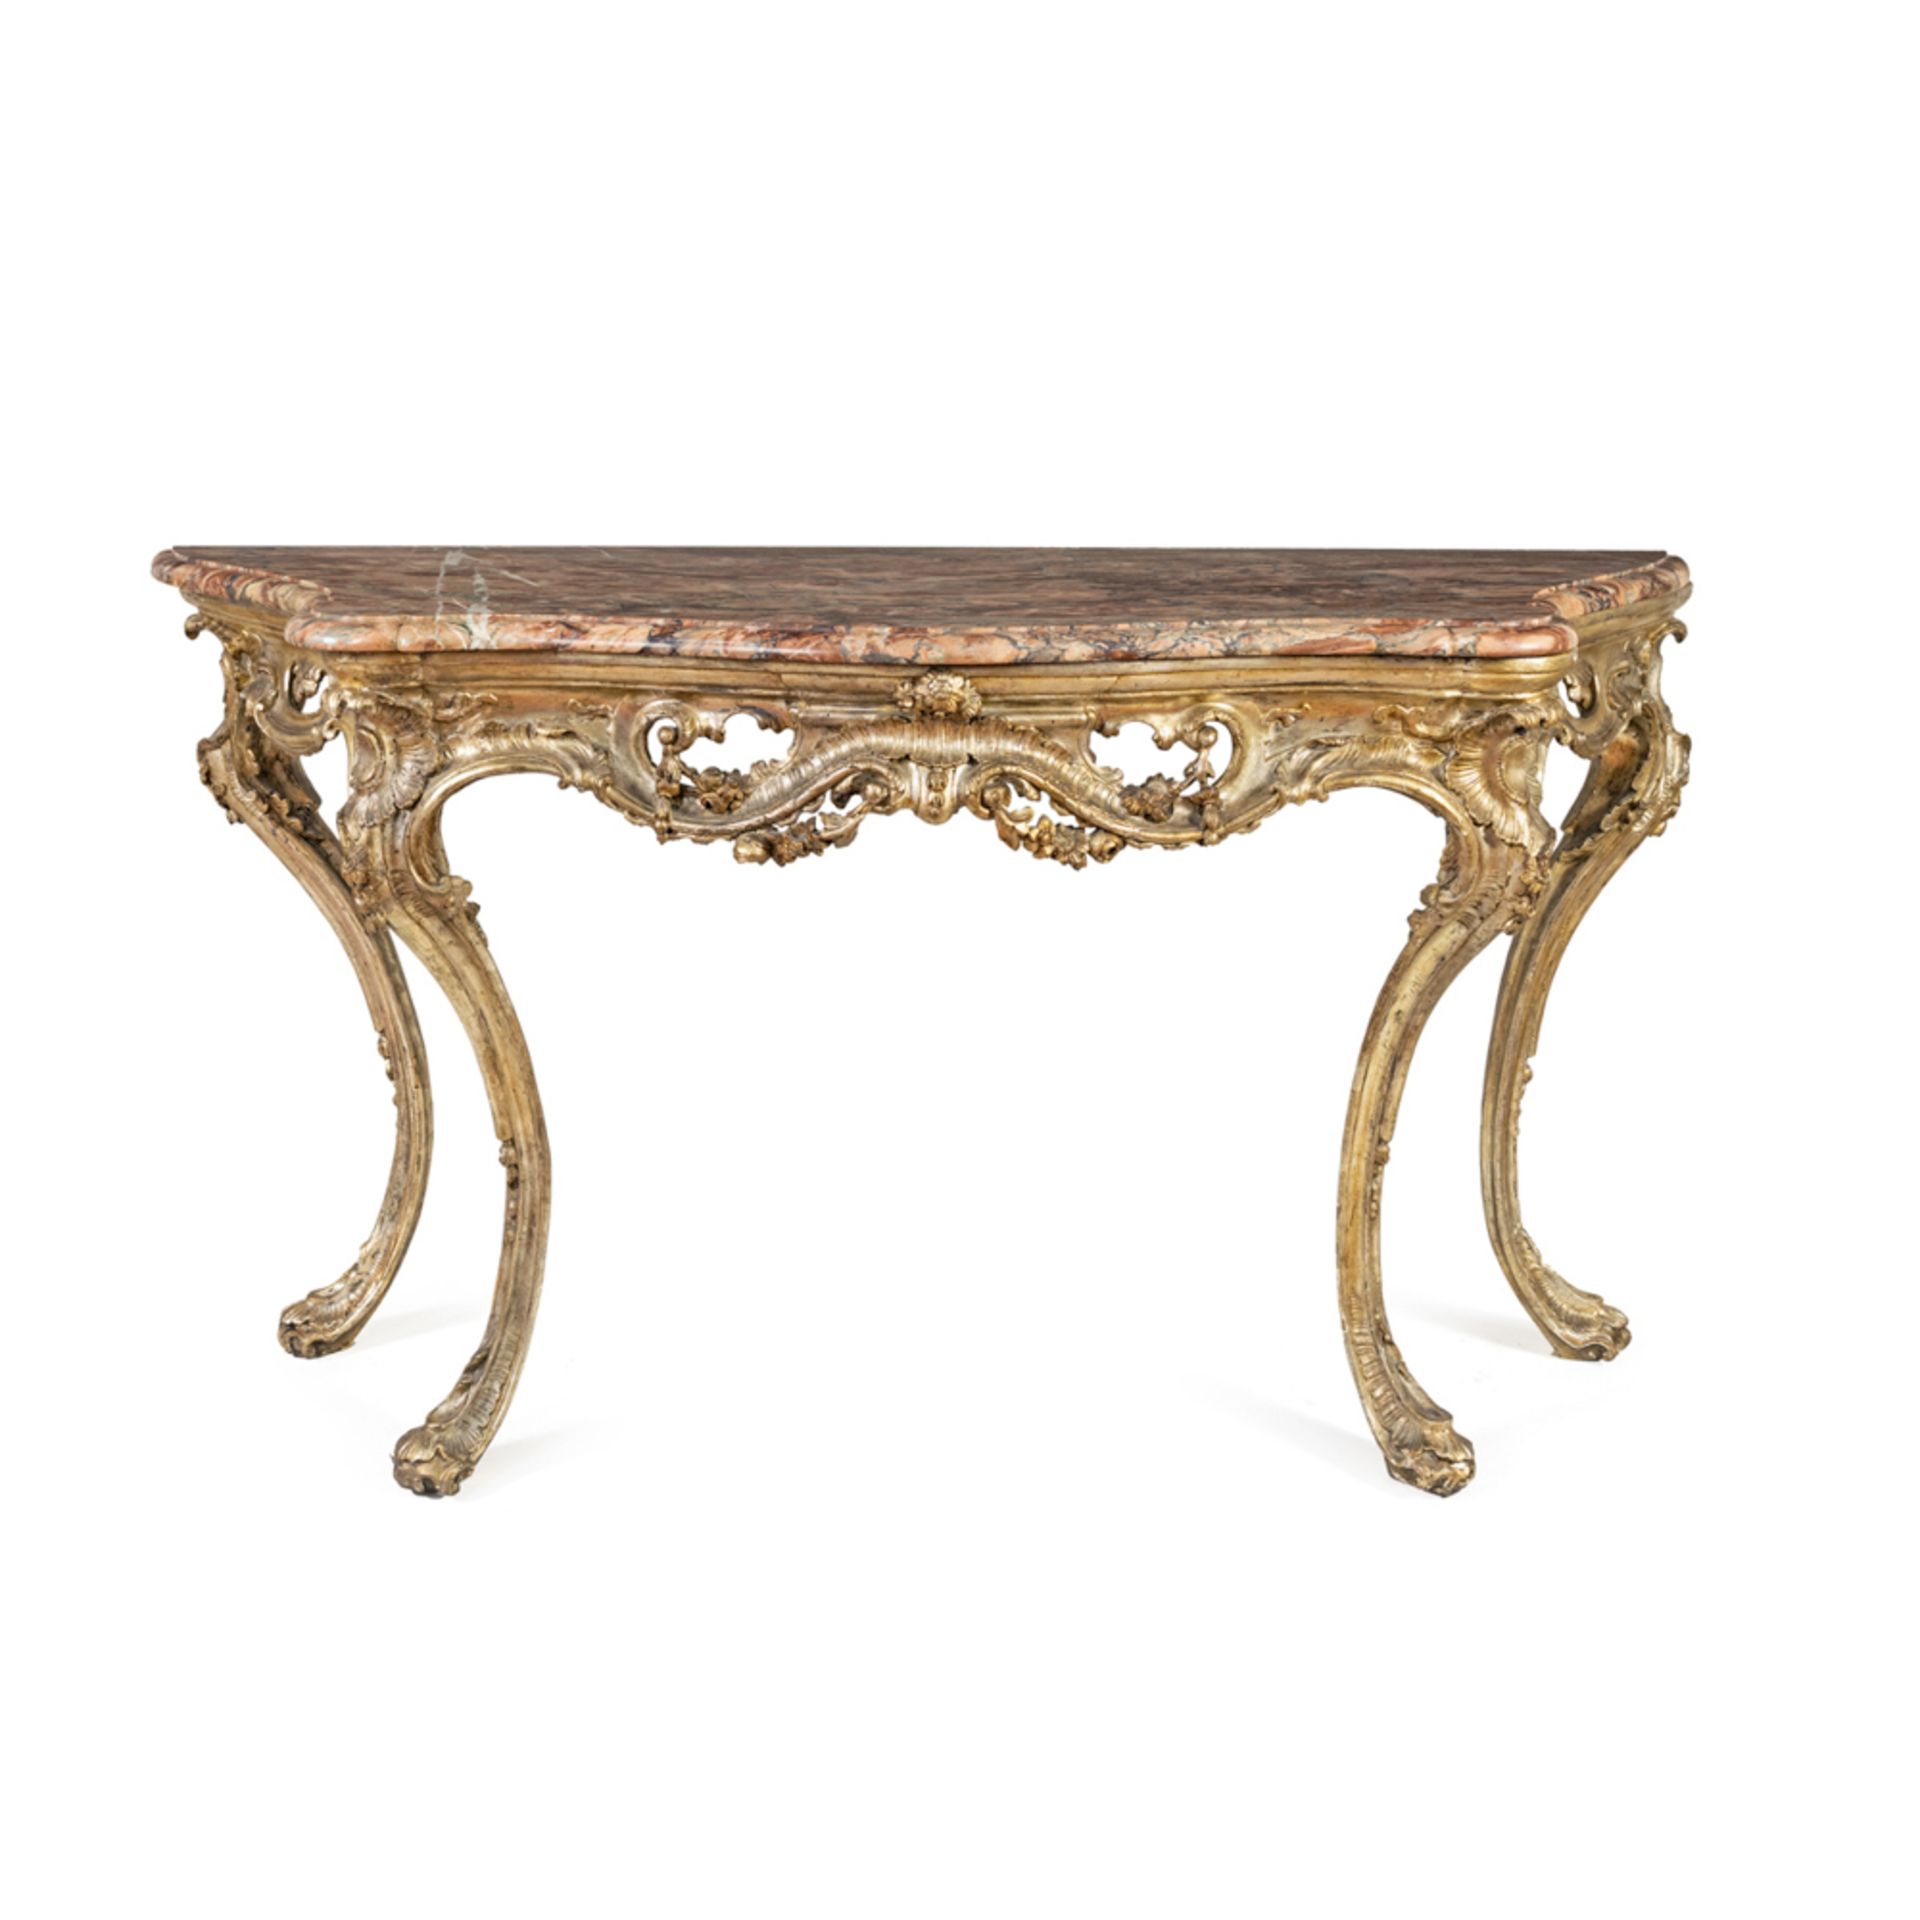 Carved and gilded wood console